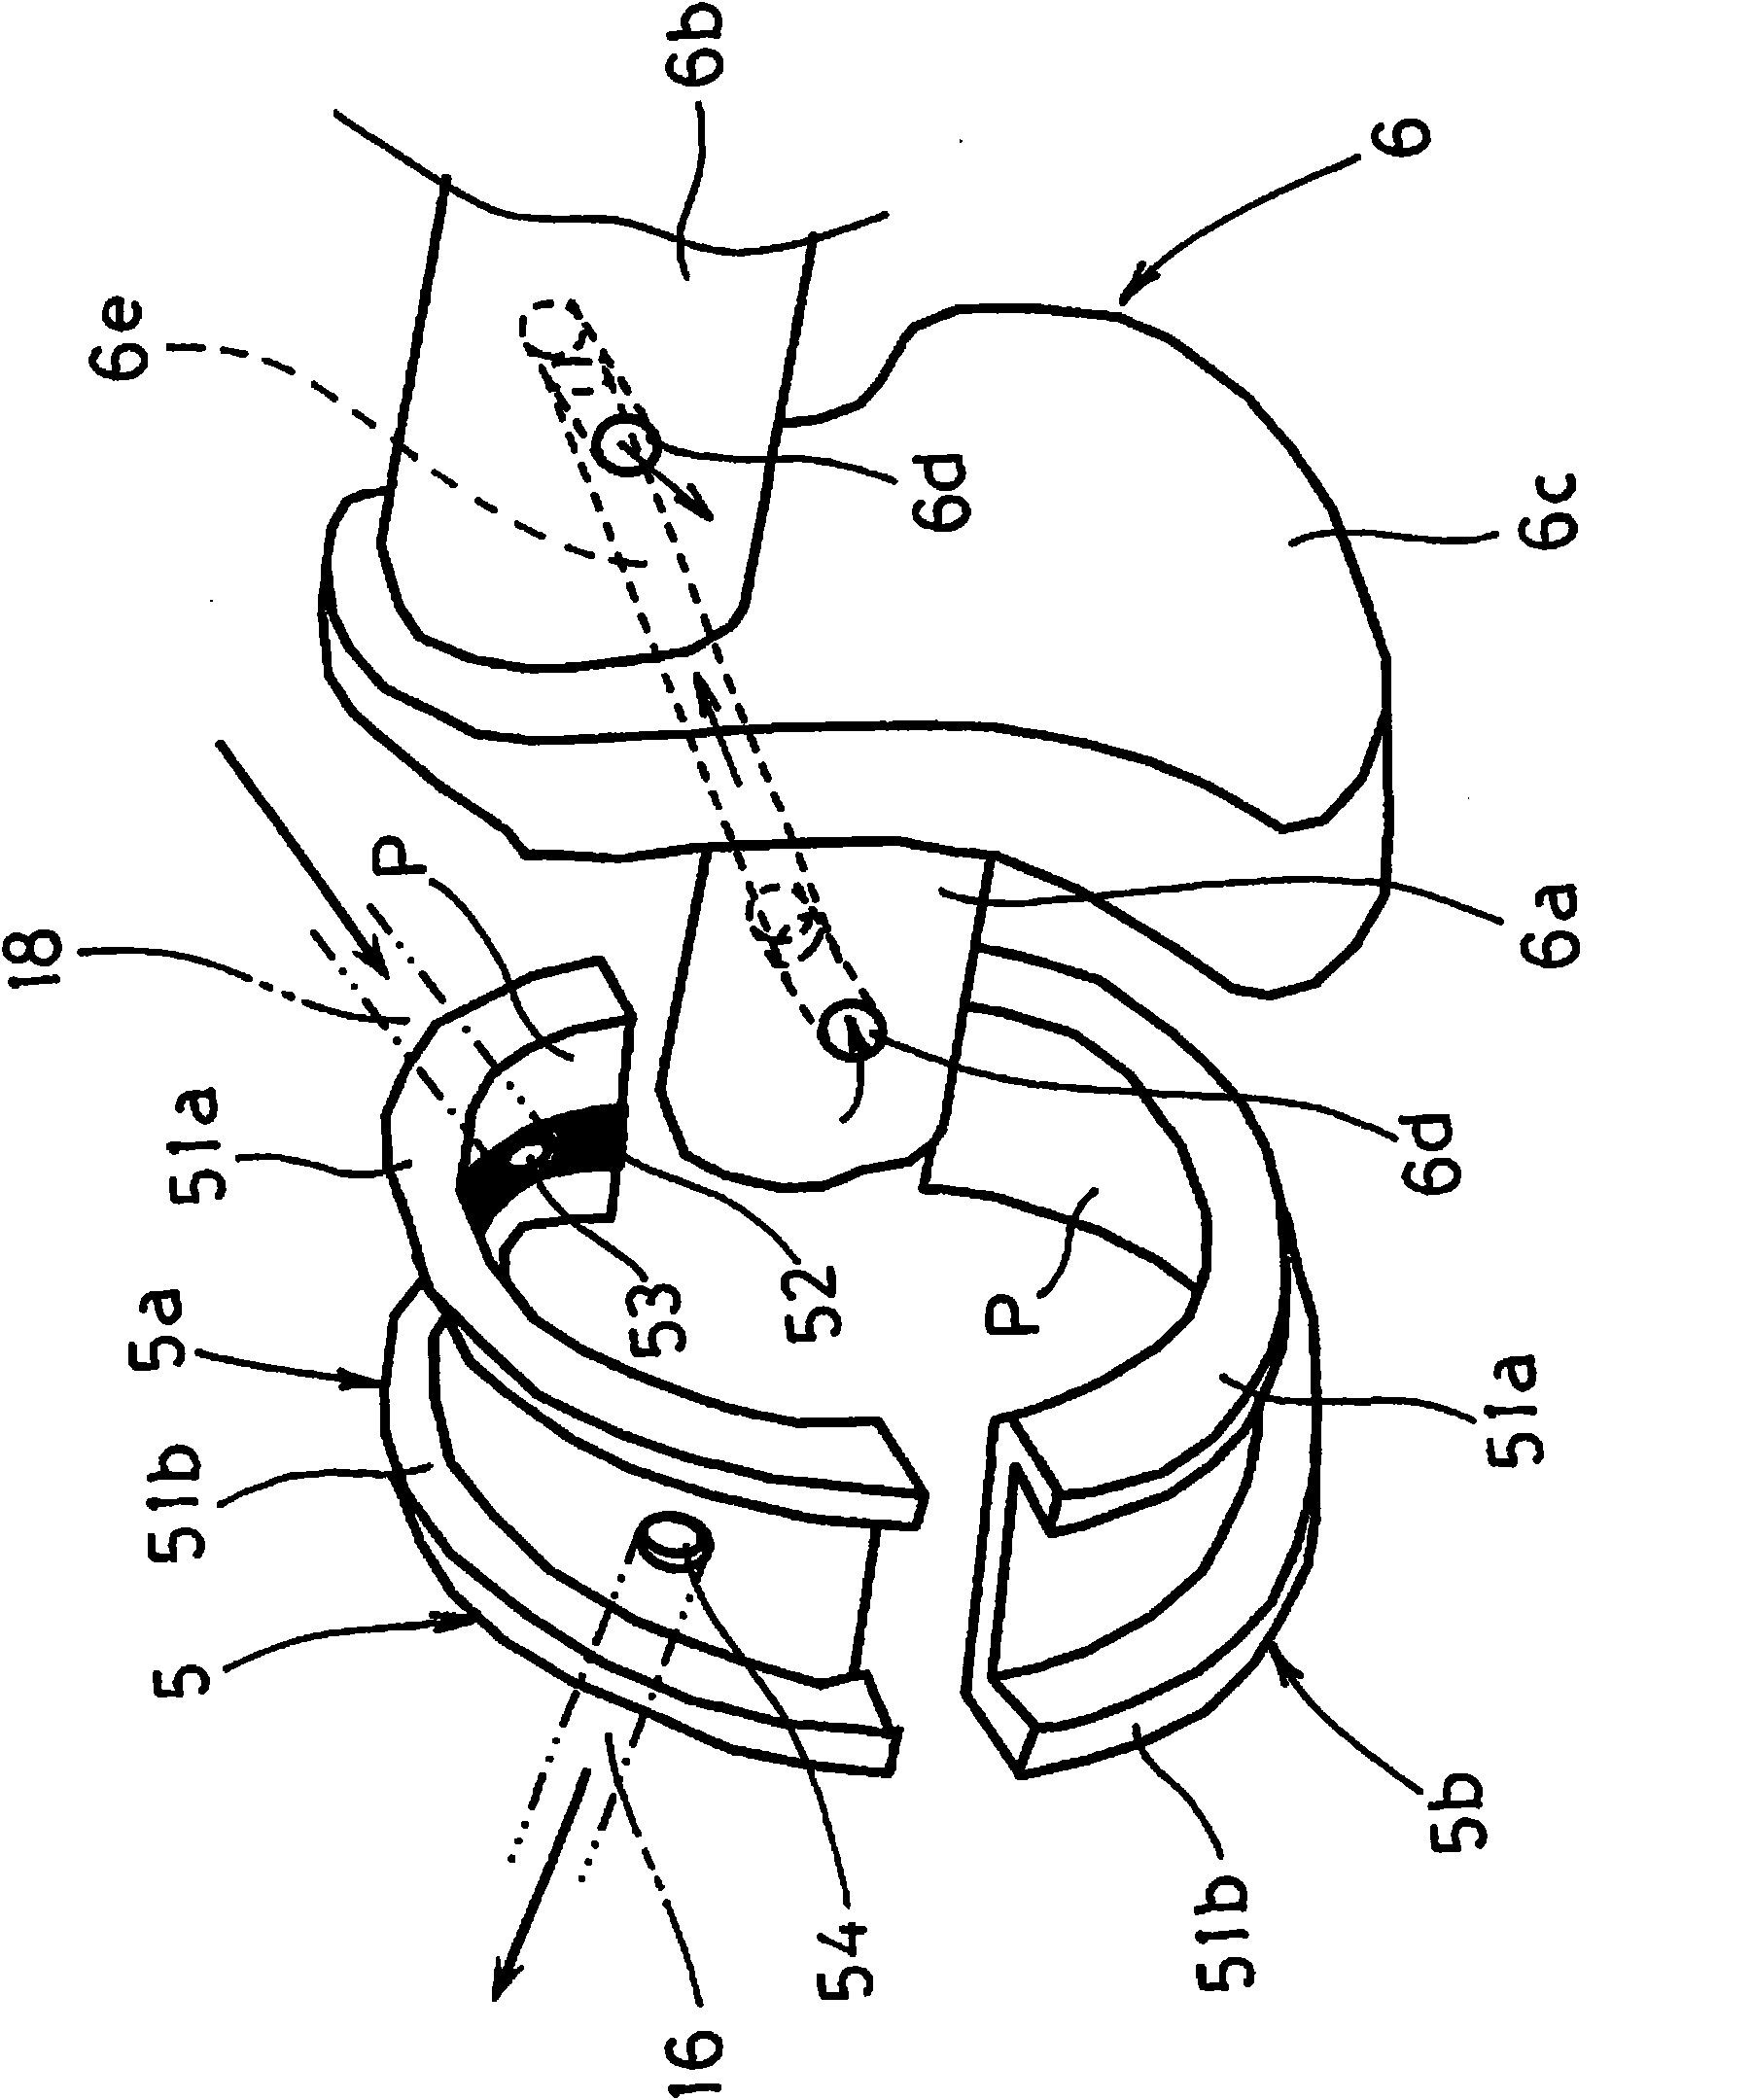 Piston cooling structure